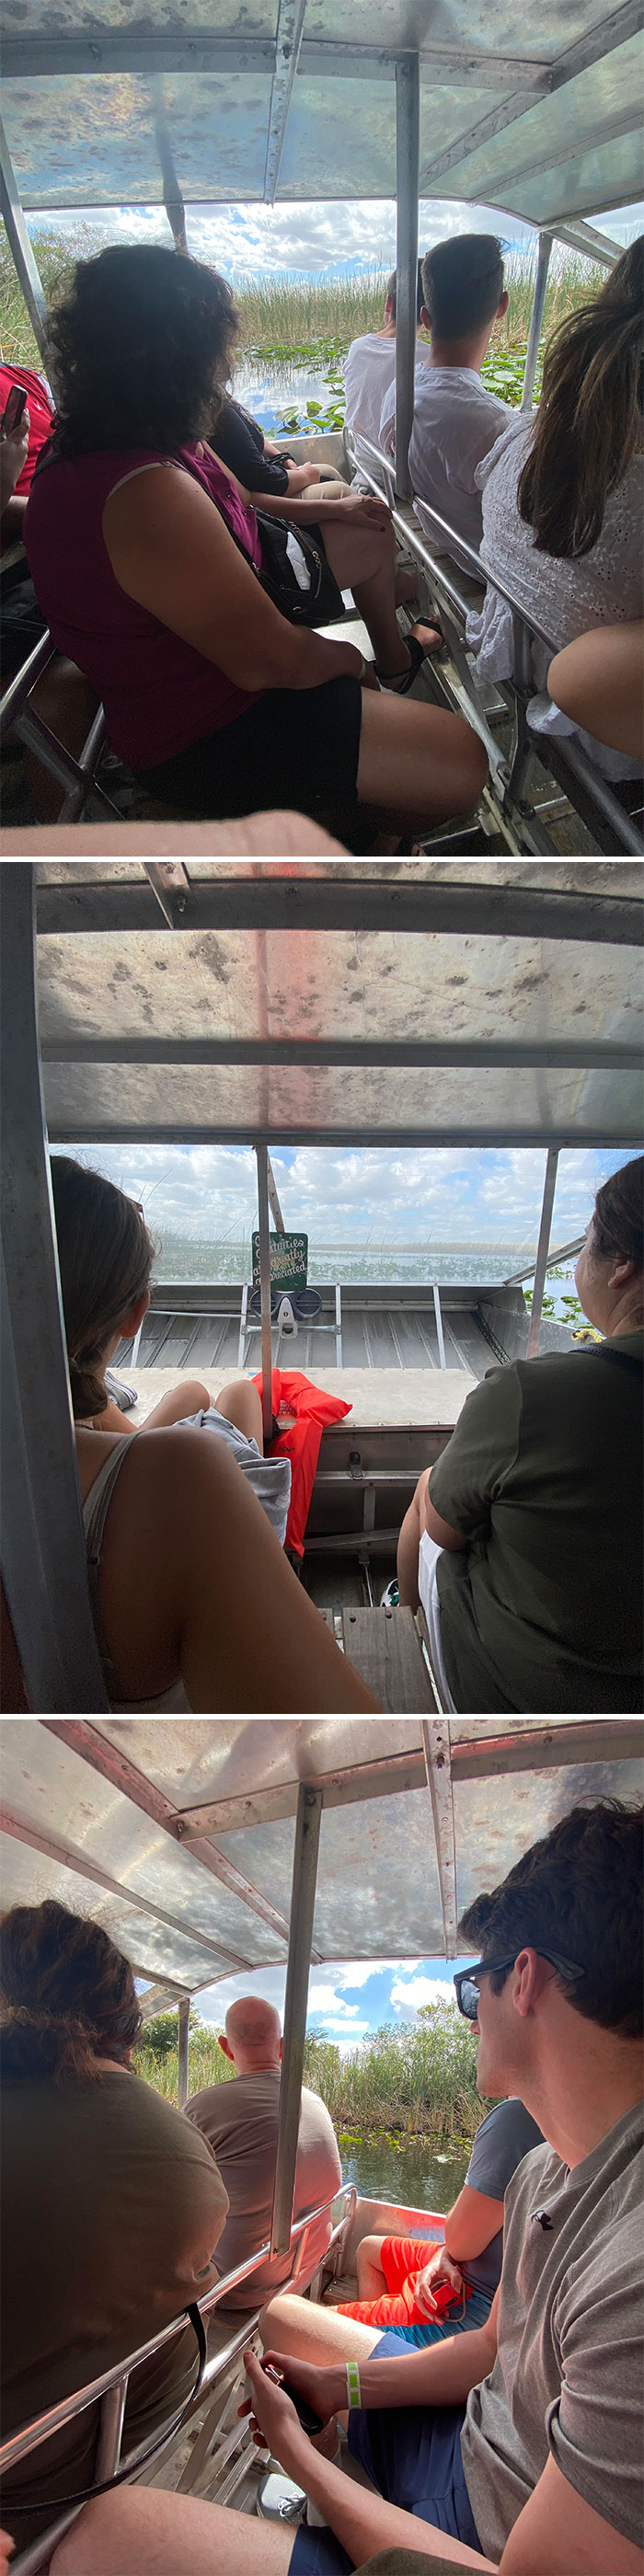 Paid $60 For An Alligator Tour, This Was My View The Whole Time